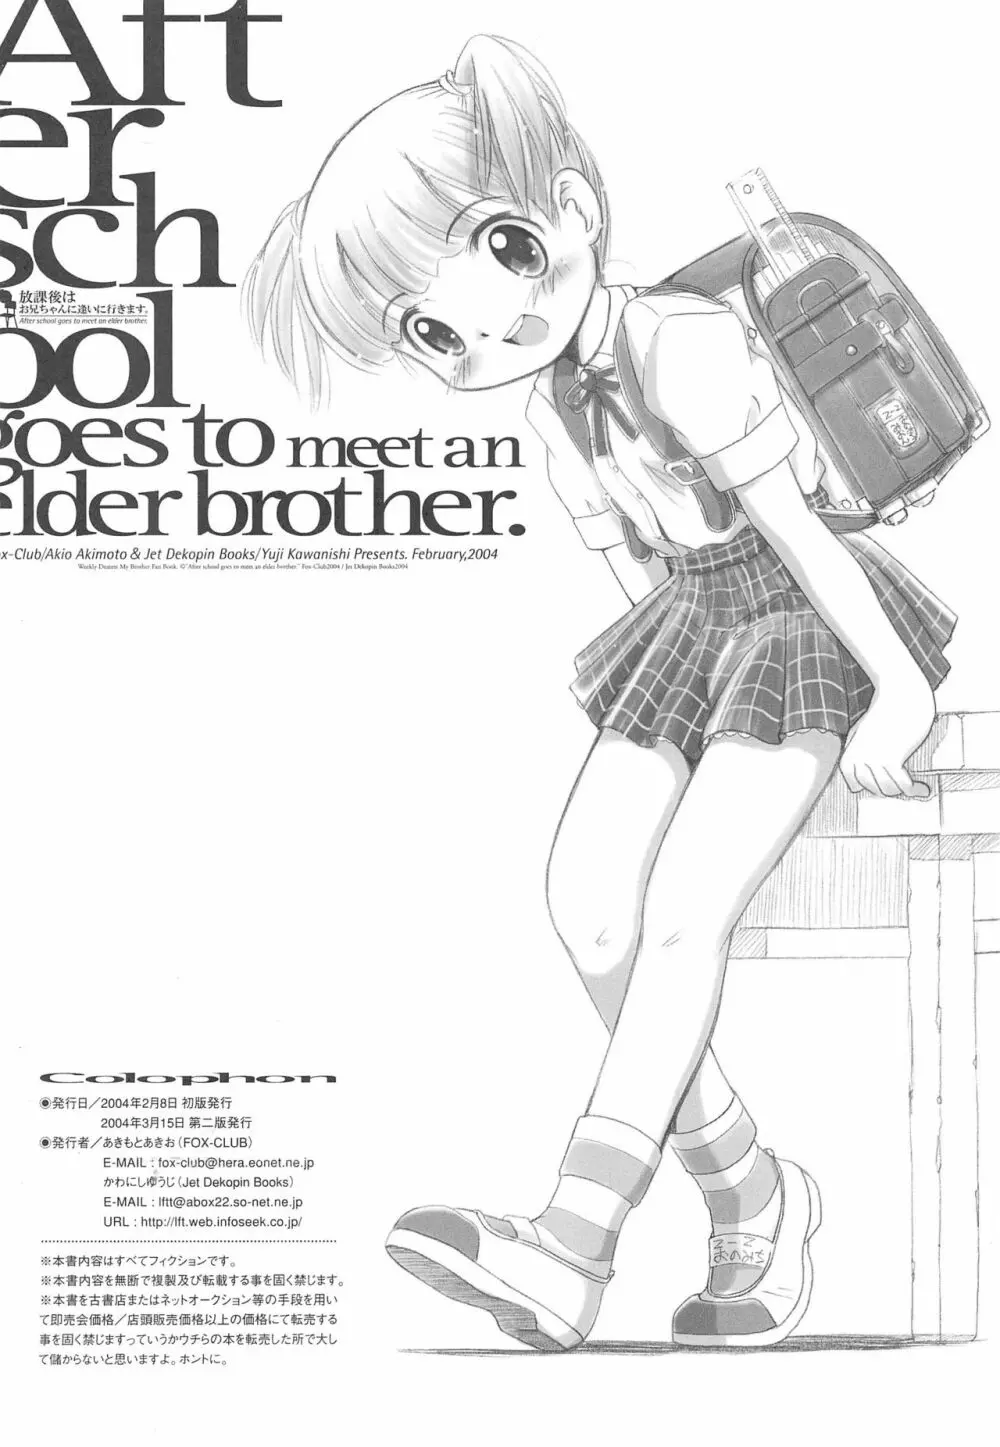 After School Goes To Meet An Elder Brother 放課後はお兄ちゃんに逢いに行きます。 8ページ